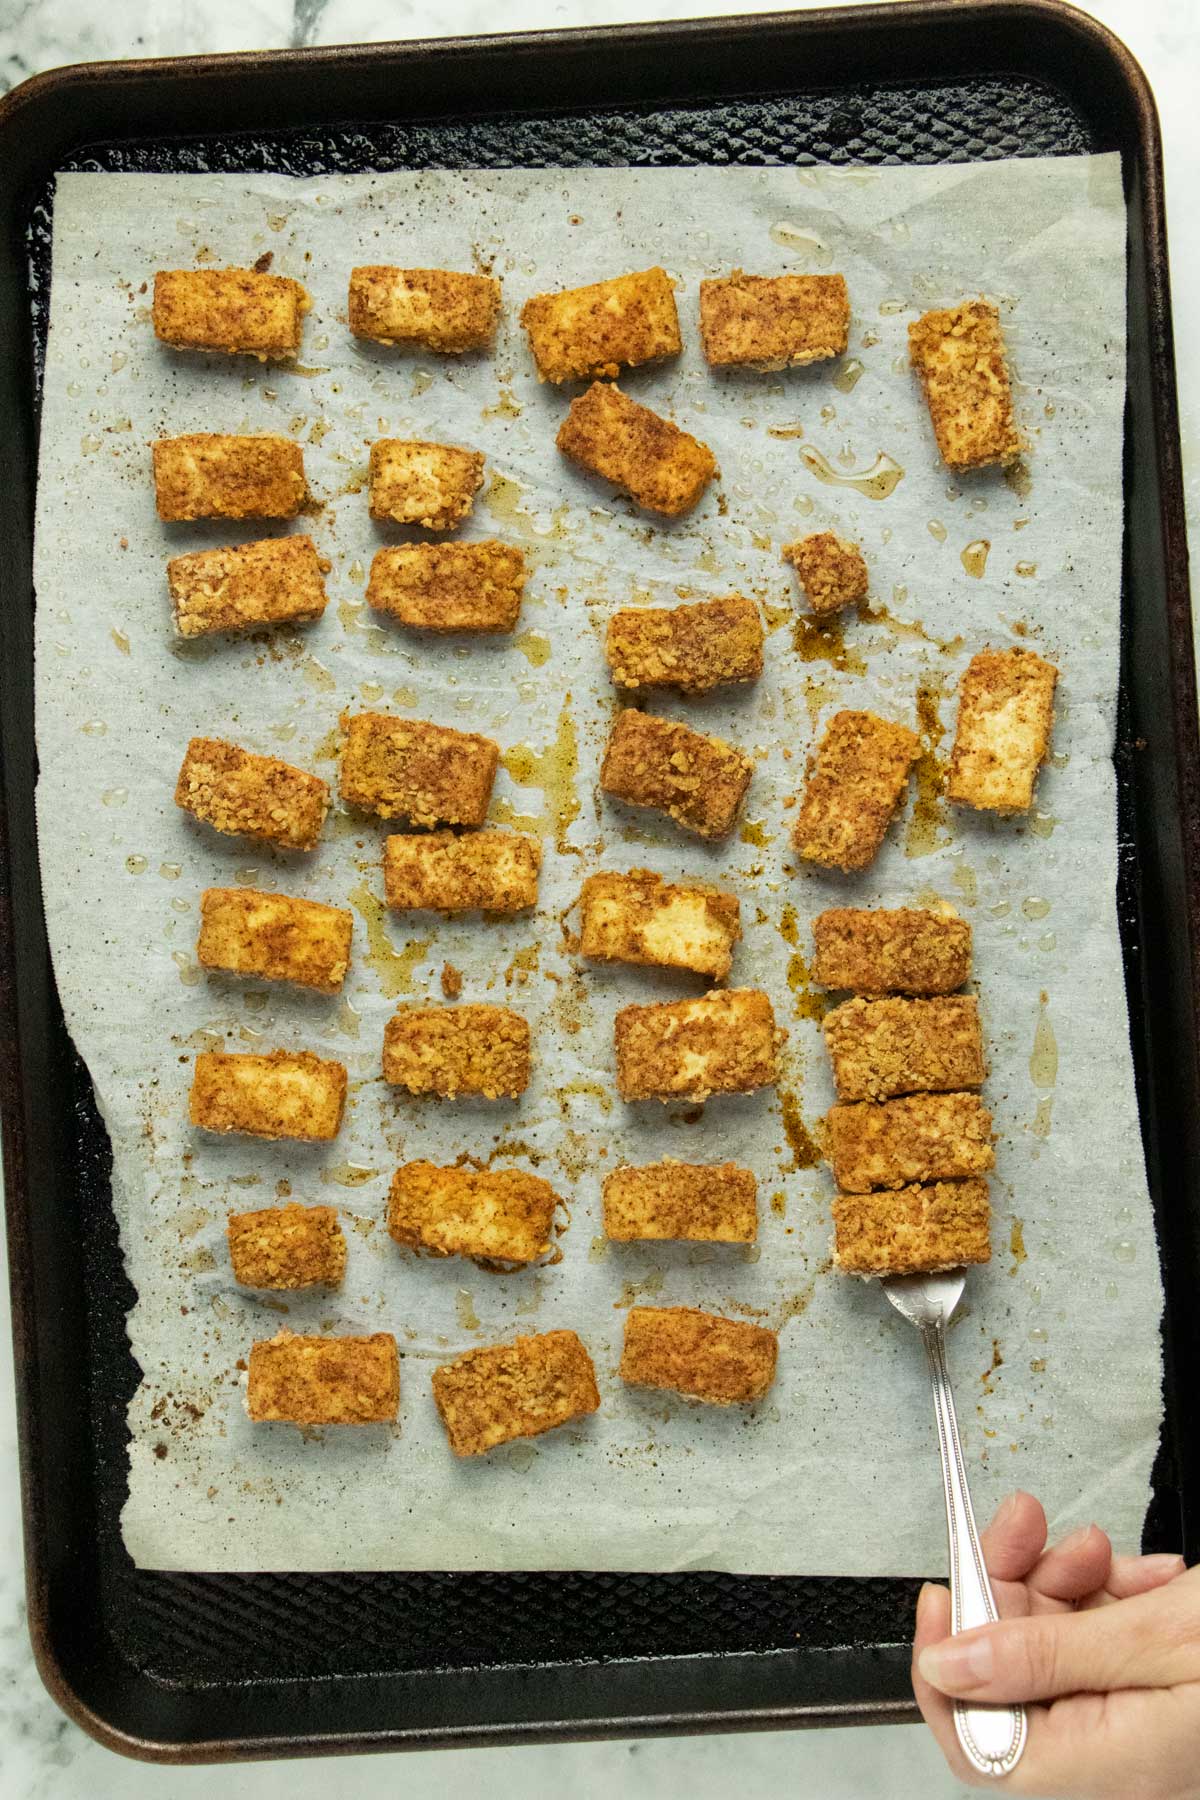 using a fork to scoop up pieces of crispy tofu from a baking sheet